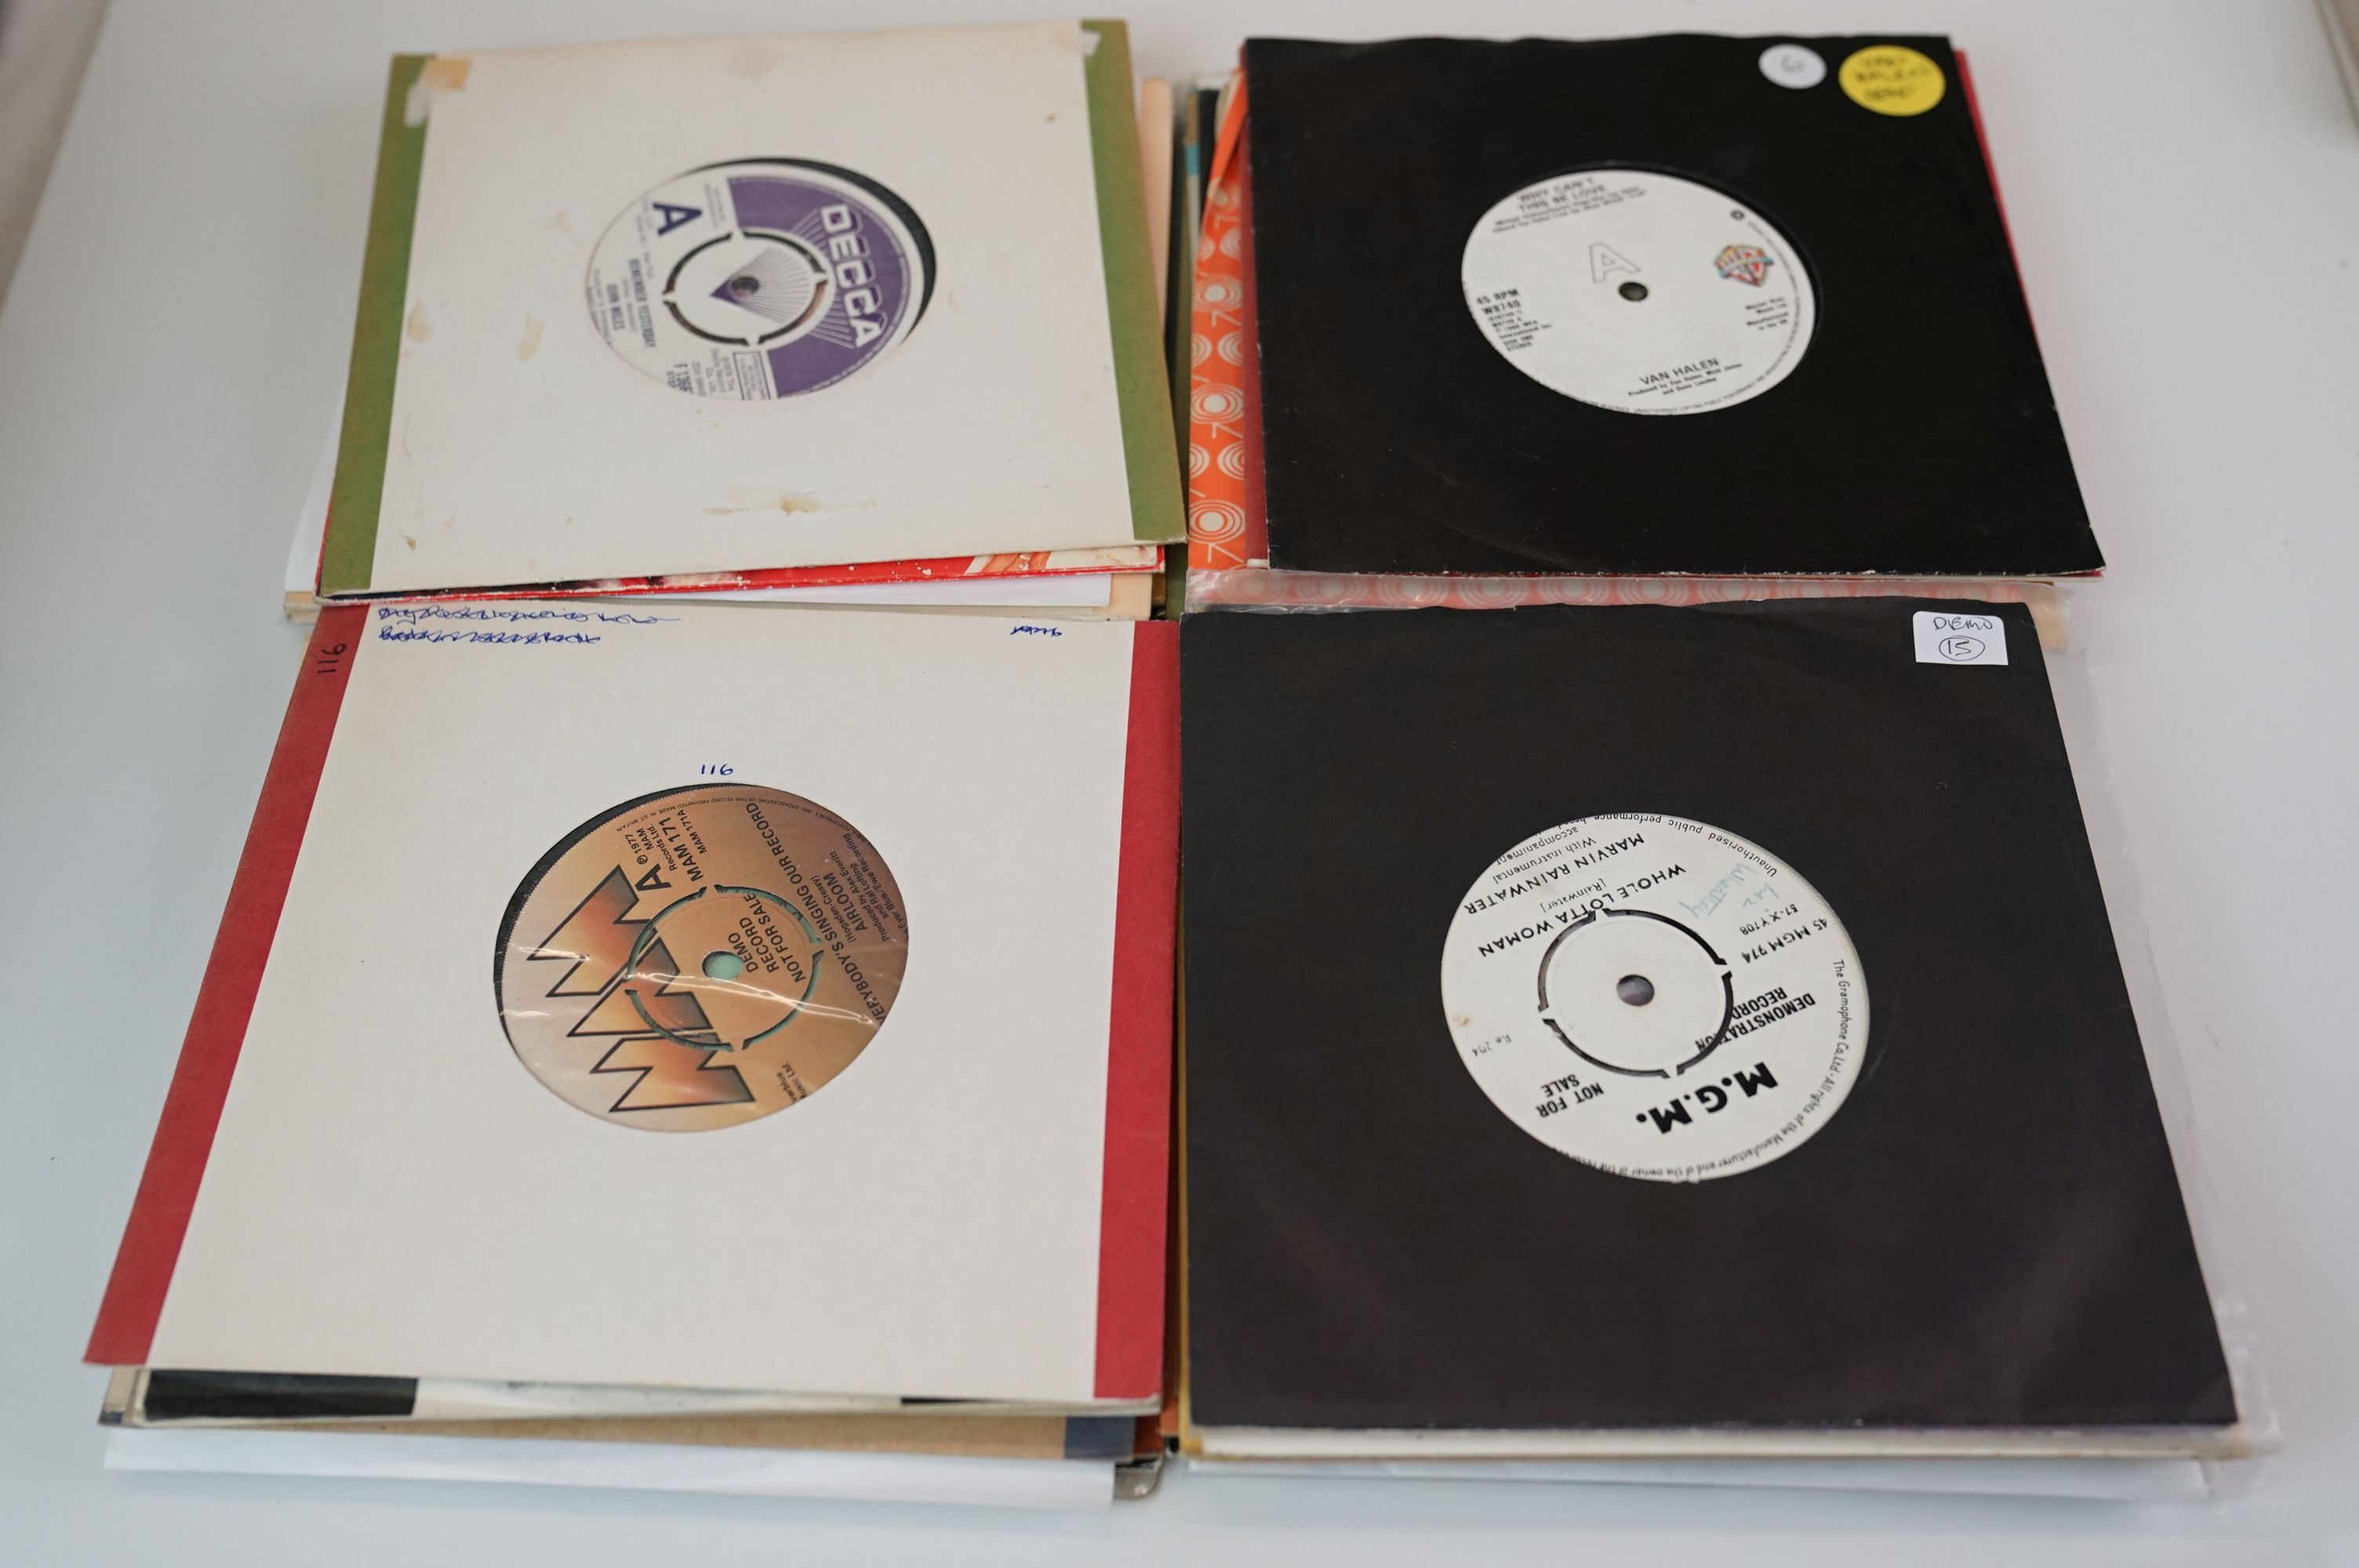 Vinyl - Collection of over 60 Demo & Promo 45s to include Gerry and the Pacemakers, Lisa Stansfield, - Image 13 of 18